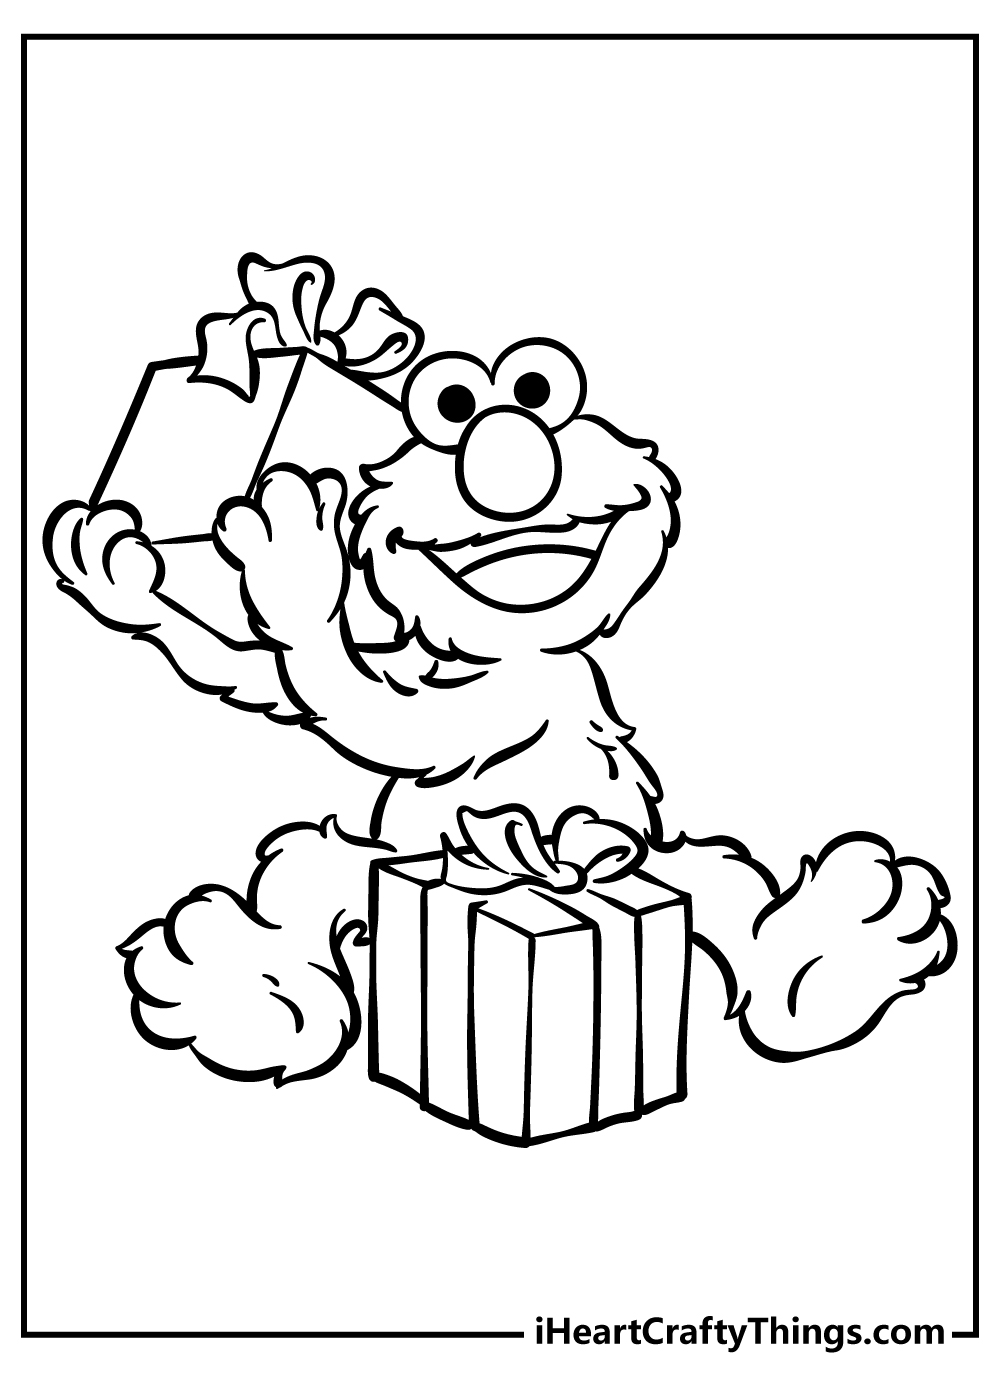 sesame street grandmas day coloring pages